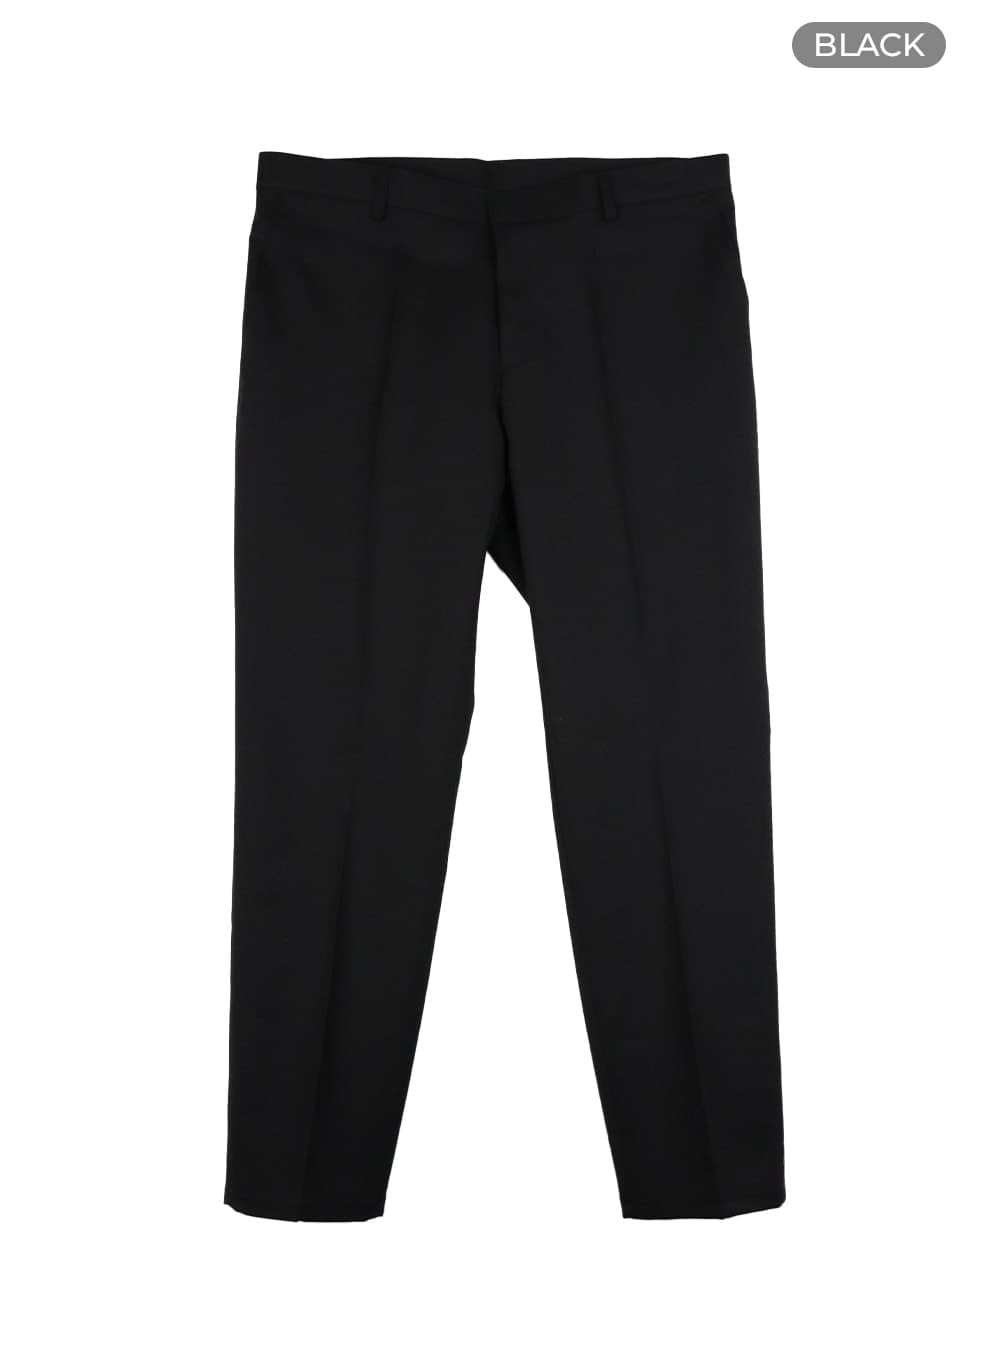 mens-solid-straight-fit-trousers-ia402 / Black